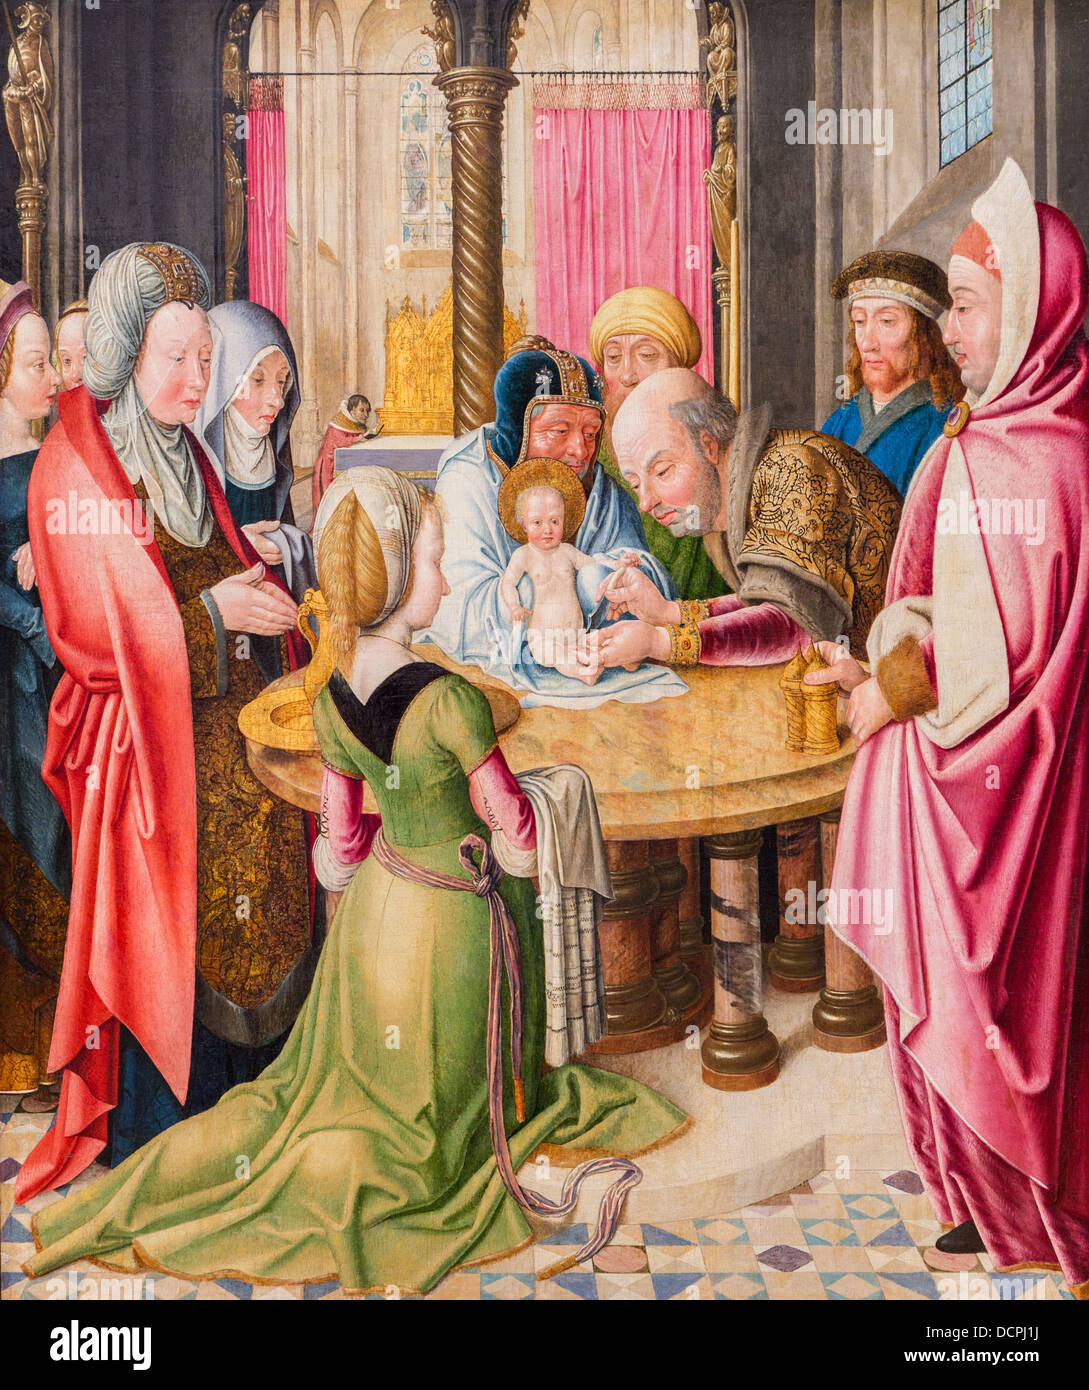 15th century  -  The Circumcision of Jesus, 1490 - Master of Saint Severin - Cologne Philippe Sauvan-Magnet / Active Museum Stock Photo